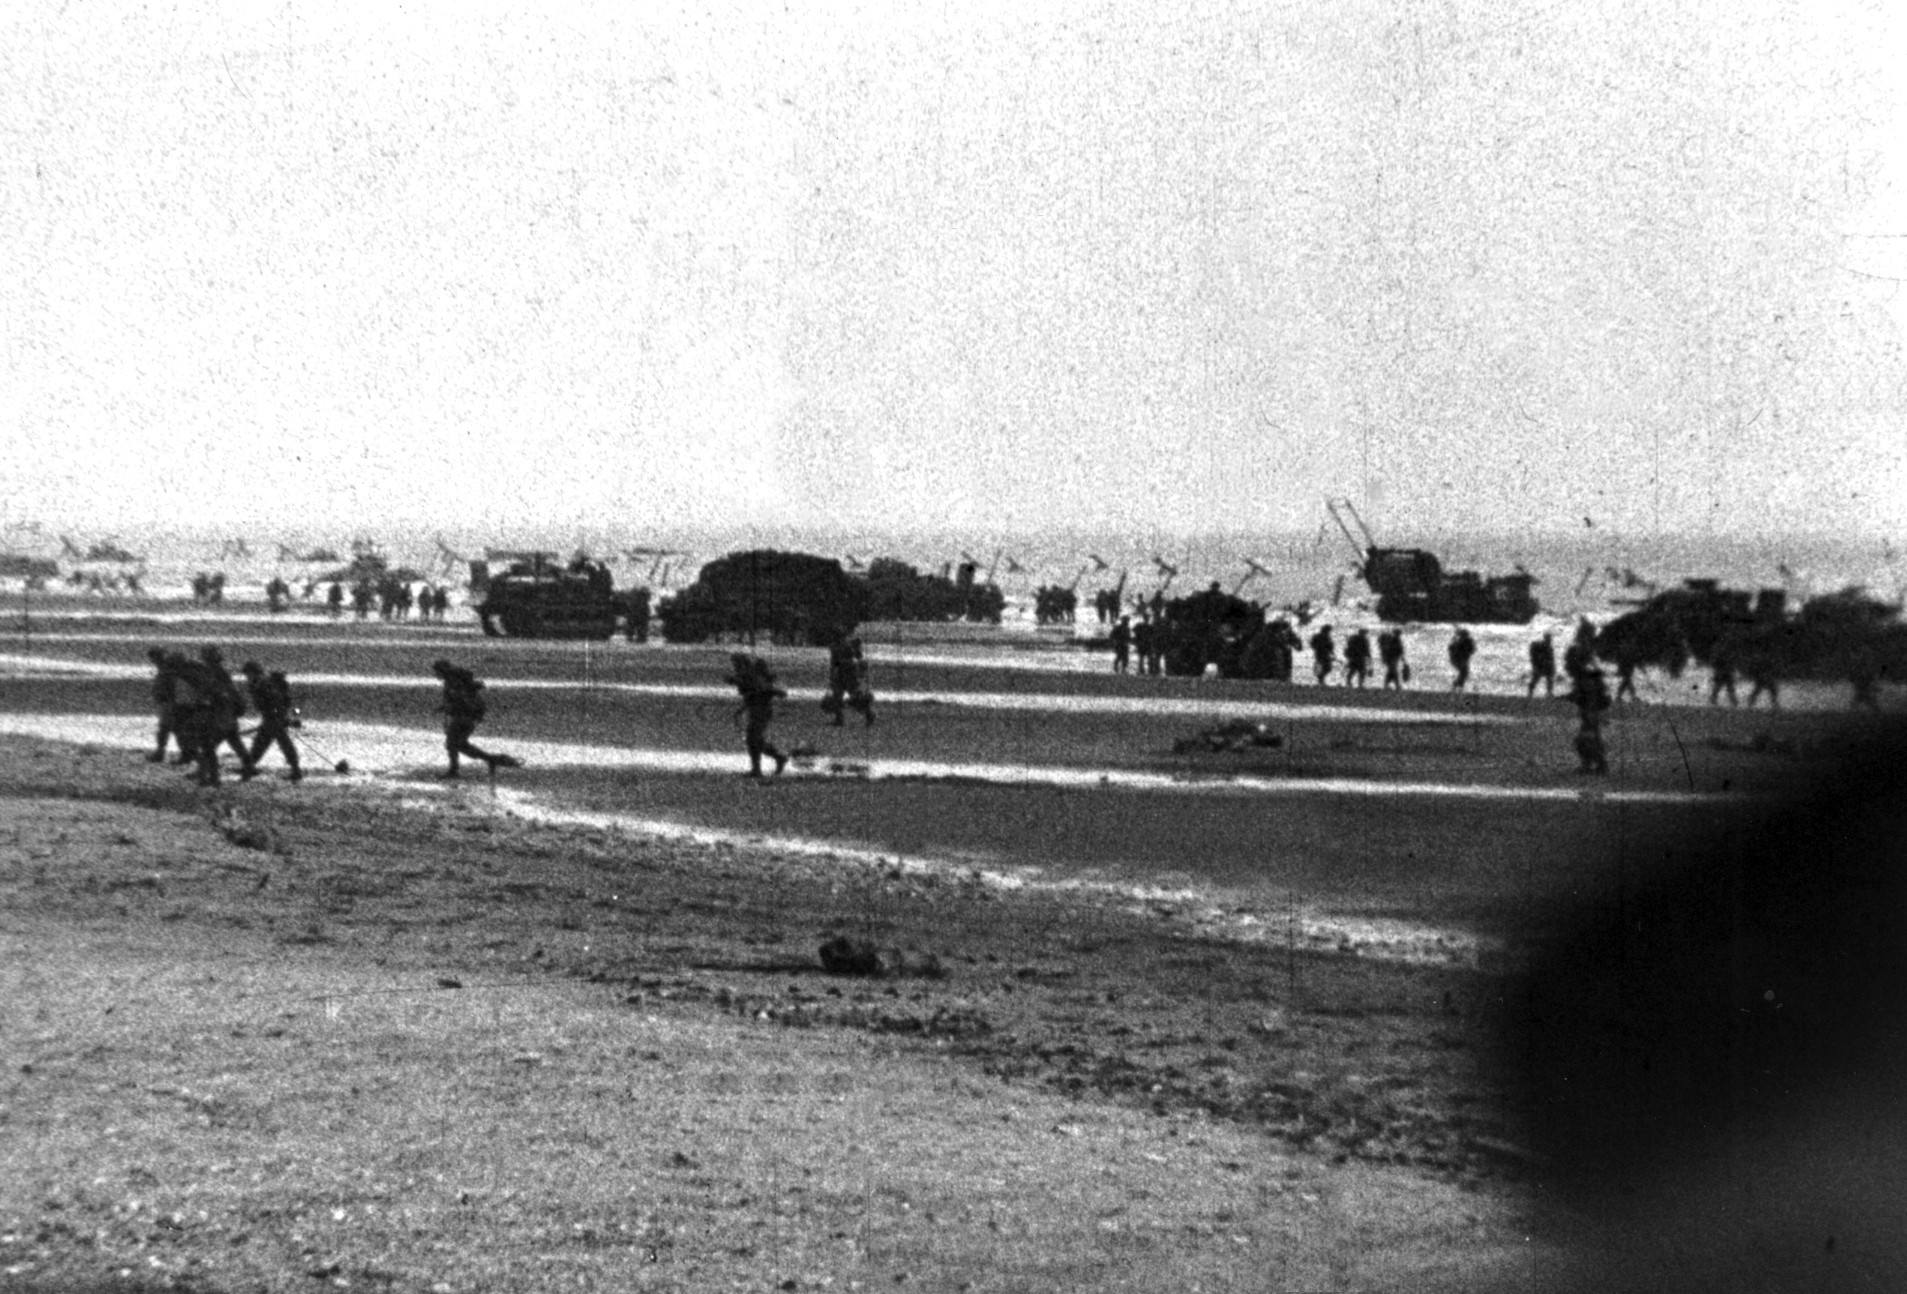 Tanks and other vehicles following, soldiers of the British 2nd Army move against German positions on Sword Beach during the morning of June 6. The British troops were able to push inland and establish a secure beachhead after overcoming stiff resistance.